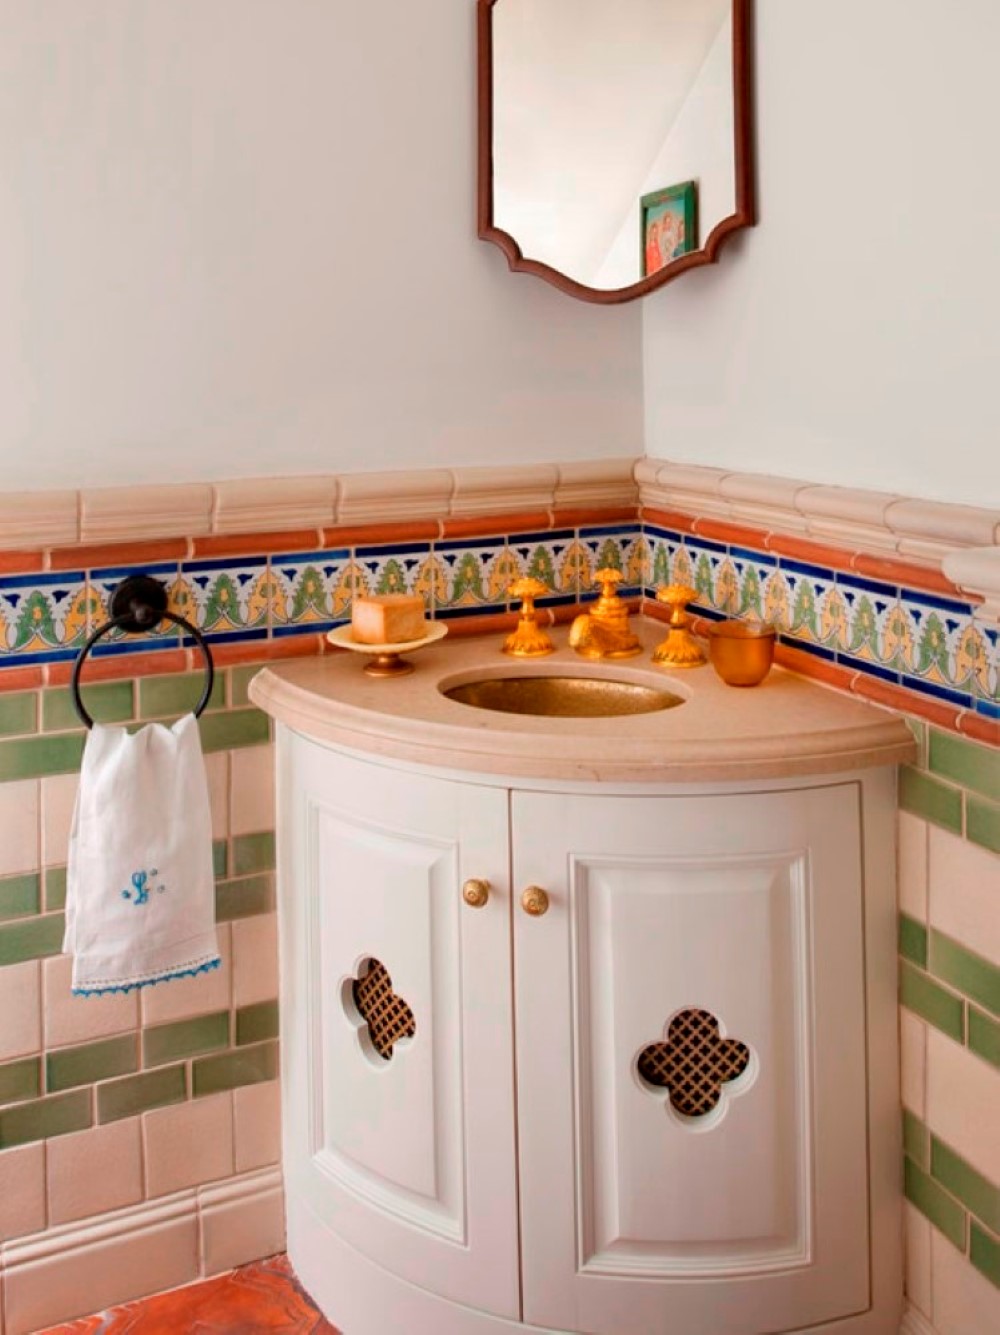 Color Wainscoting Mixed Adorable Color Wainscoting Tile Design Mixed With Orange Metal Faucet In Moroccan Bathroom Sink Cabinet Bathroom Bathroom Focal Point With Splendid Bathroom Sink Cabinets